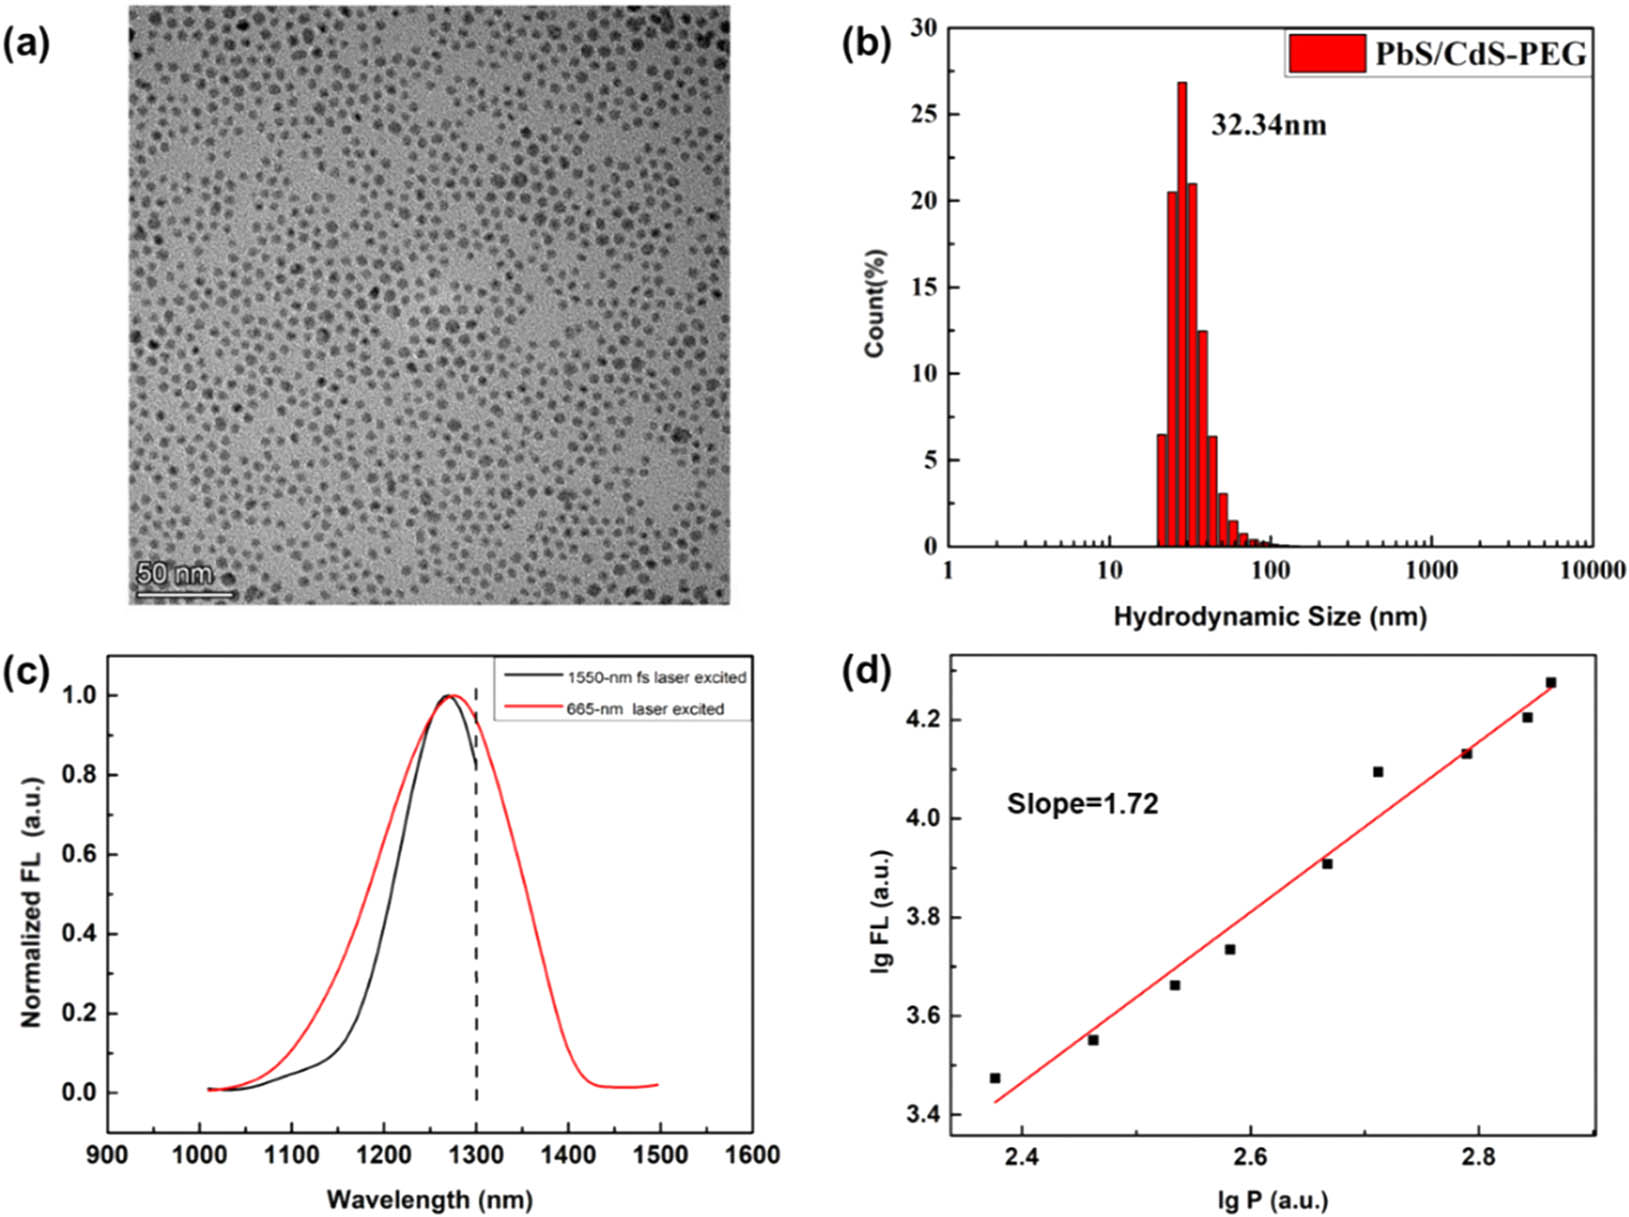 Morphological characterization and optical properties of PbS/CdS quantum dots (PbS QDs). (a) Transmission electron microscopy (TEM) image of PbS QDs. (b) Dynamic light scattering (DLS) profile of PbS QDs. (c) One-photon and multiphoton fluorescence spectra of PbS QDs. (d) Relationship of 1550 nm fs excitation power and fluorescence intensity from QDs.